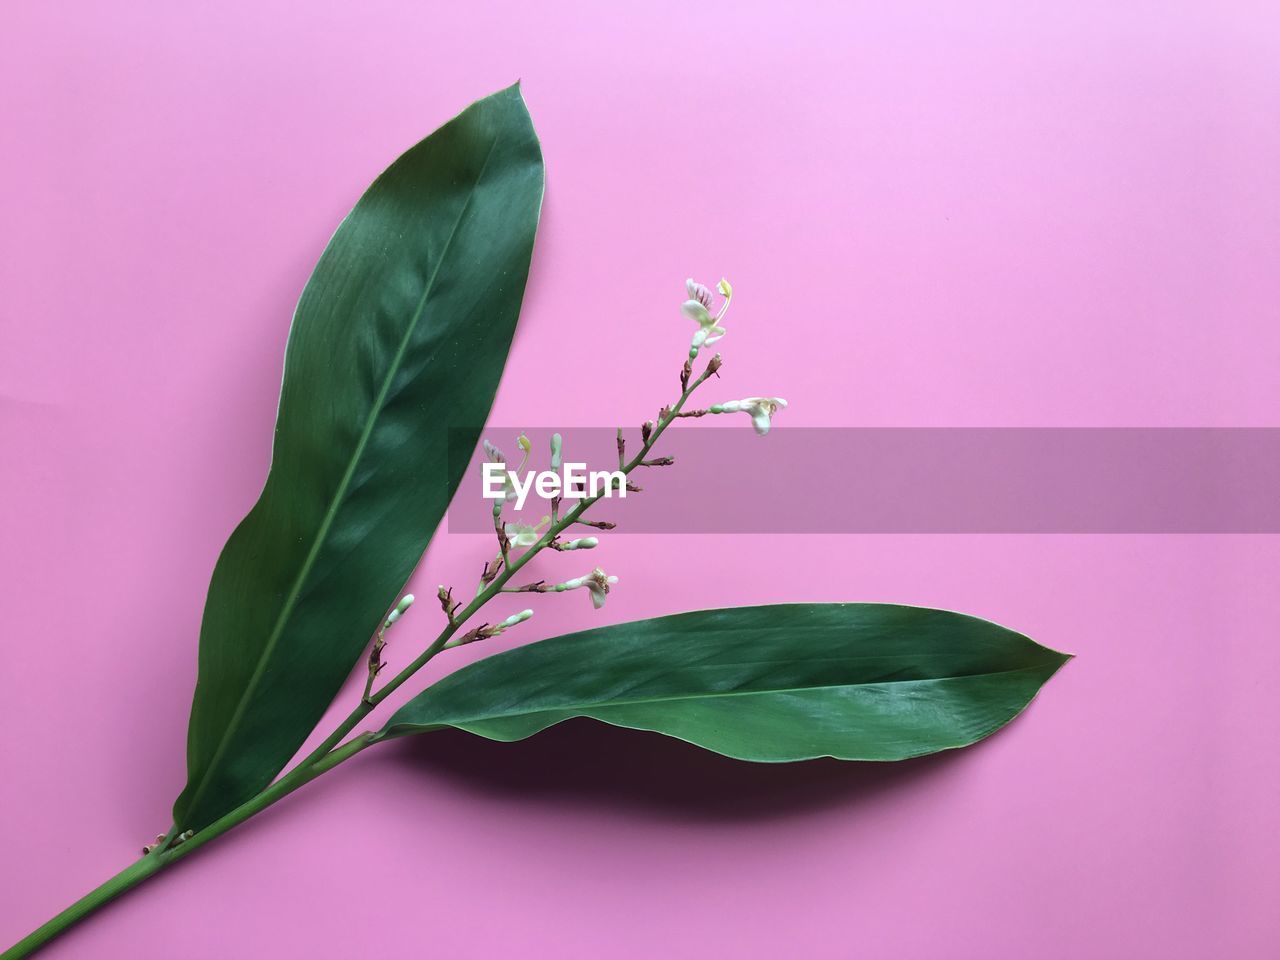 CLOSE-UP OF GREEN PLANT AGAINST PINK BACKGROUND